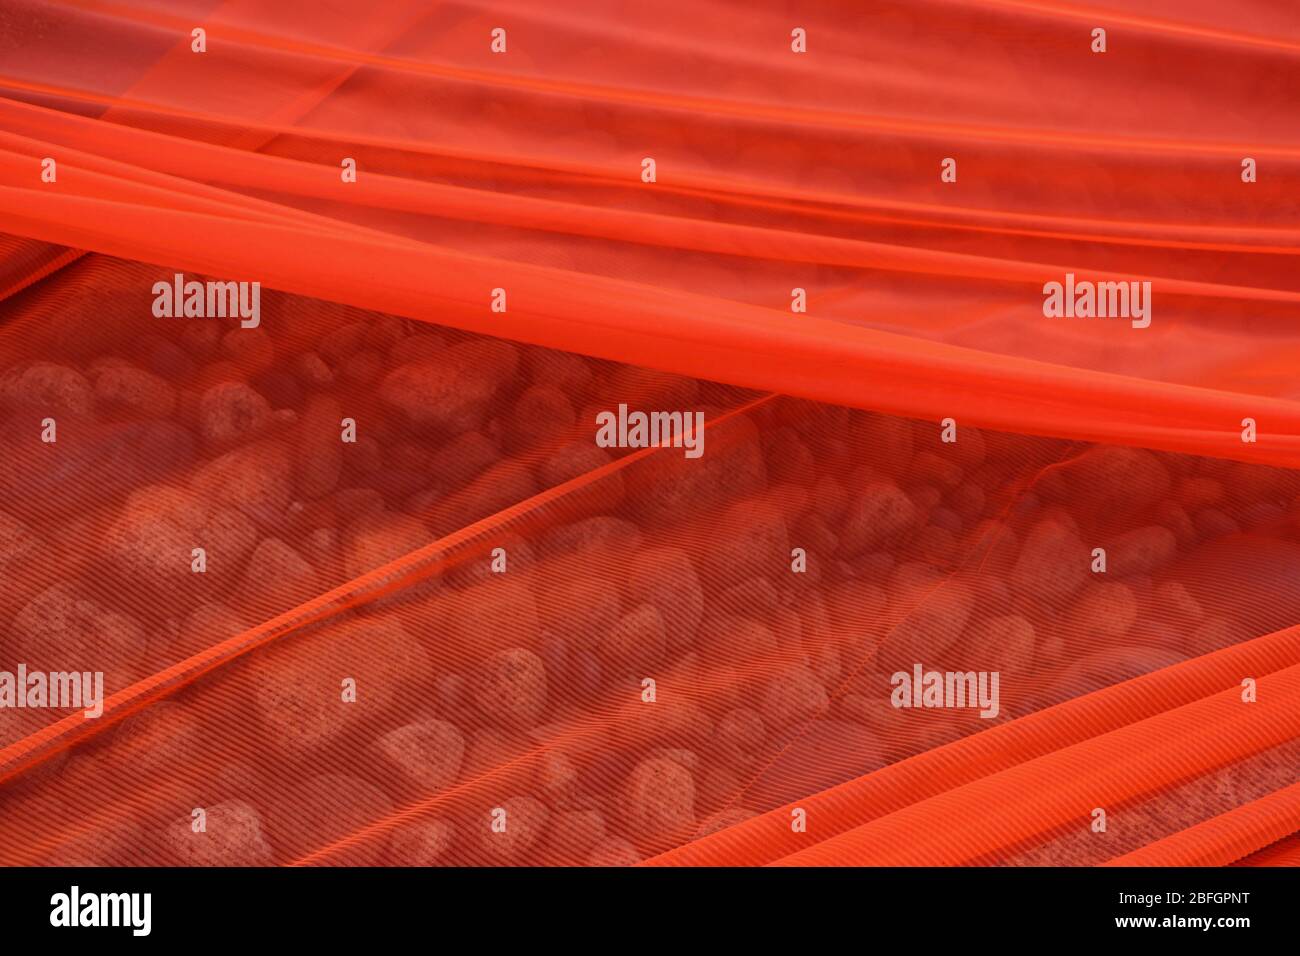 Soft open mesh orange shade cloth stretched over a bed of rocks that can be partially seen through it. Diagonal lines, good for background, copy. Stock Photo